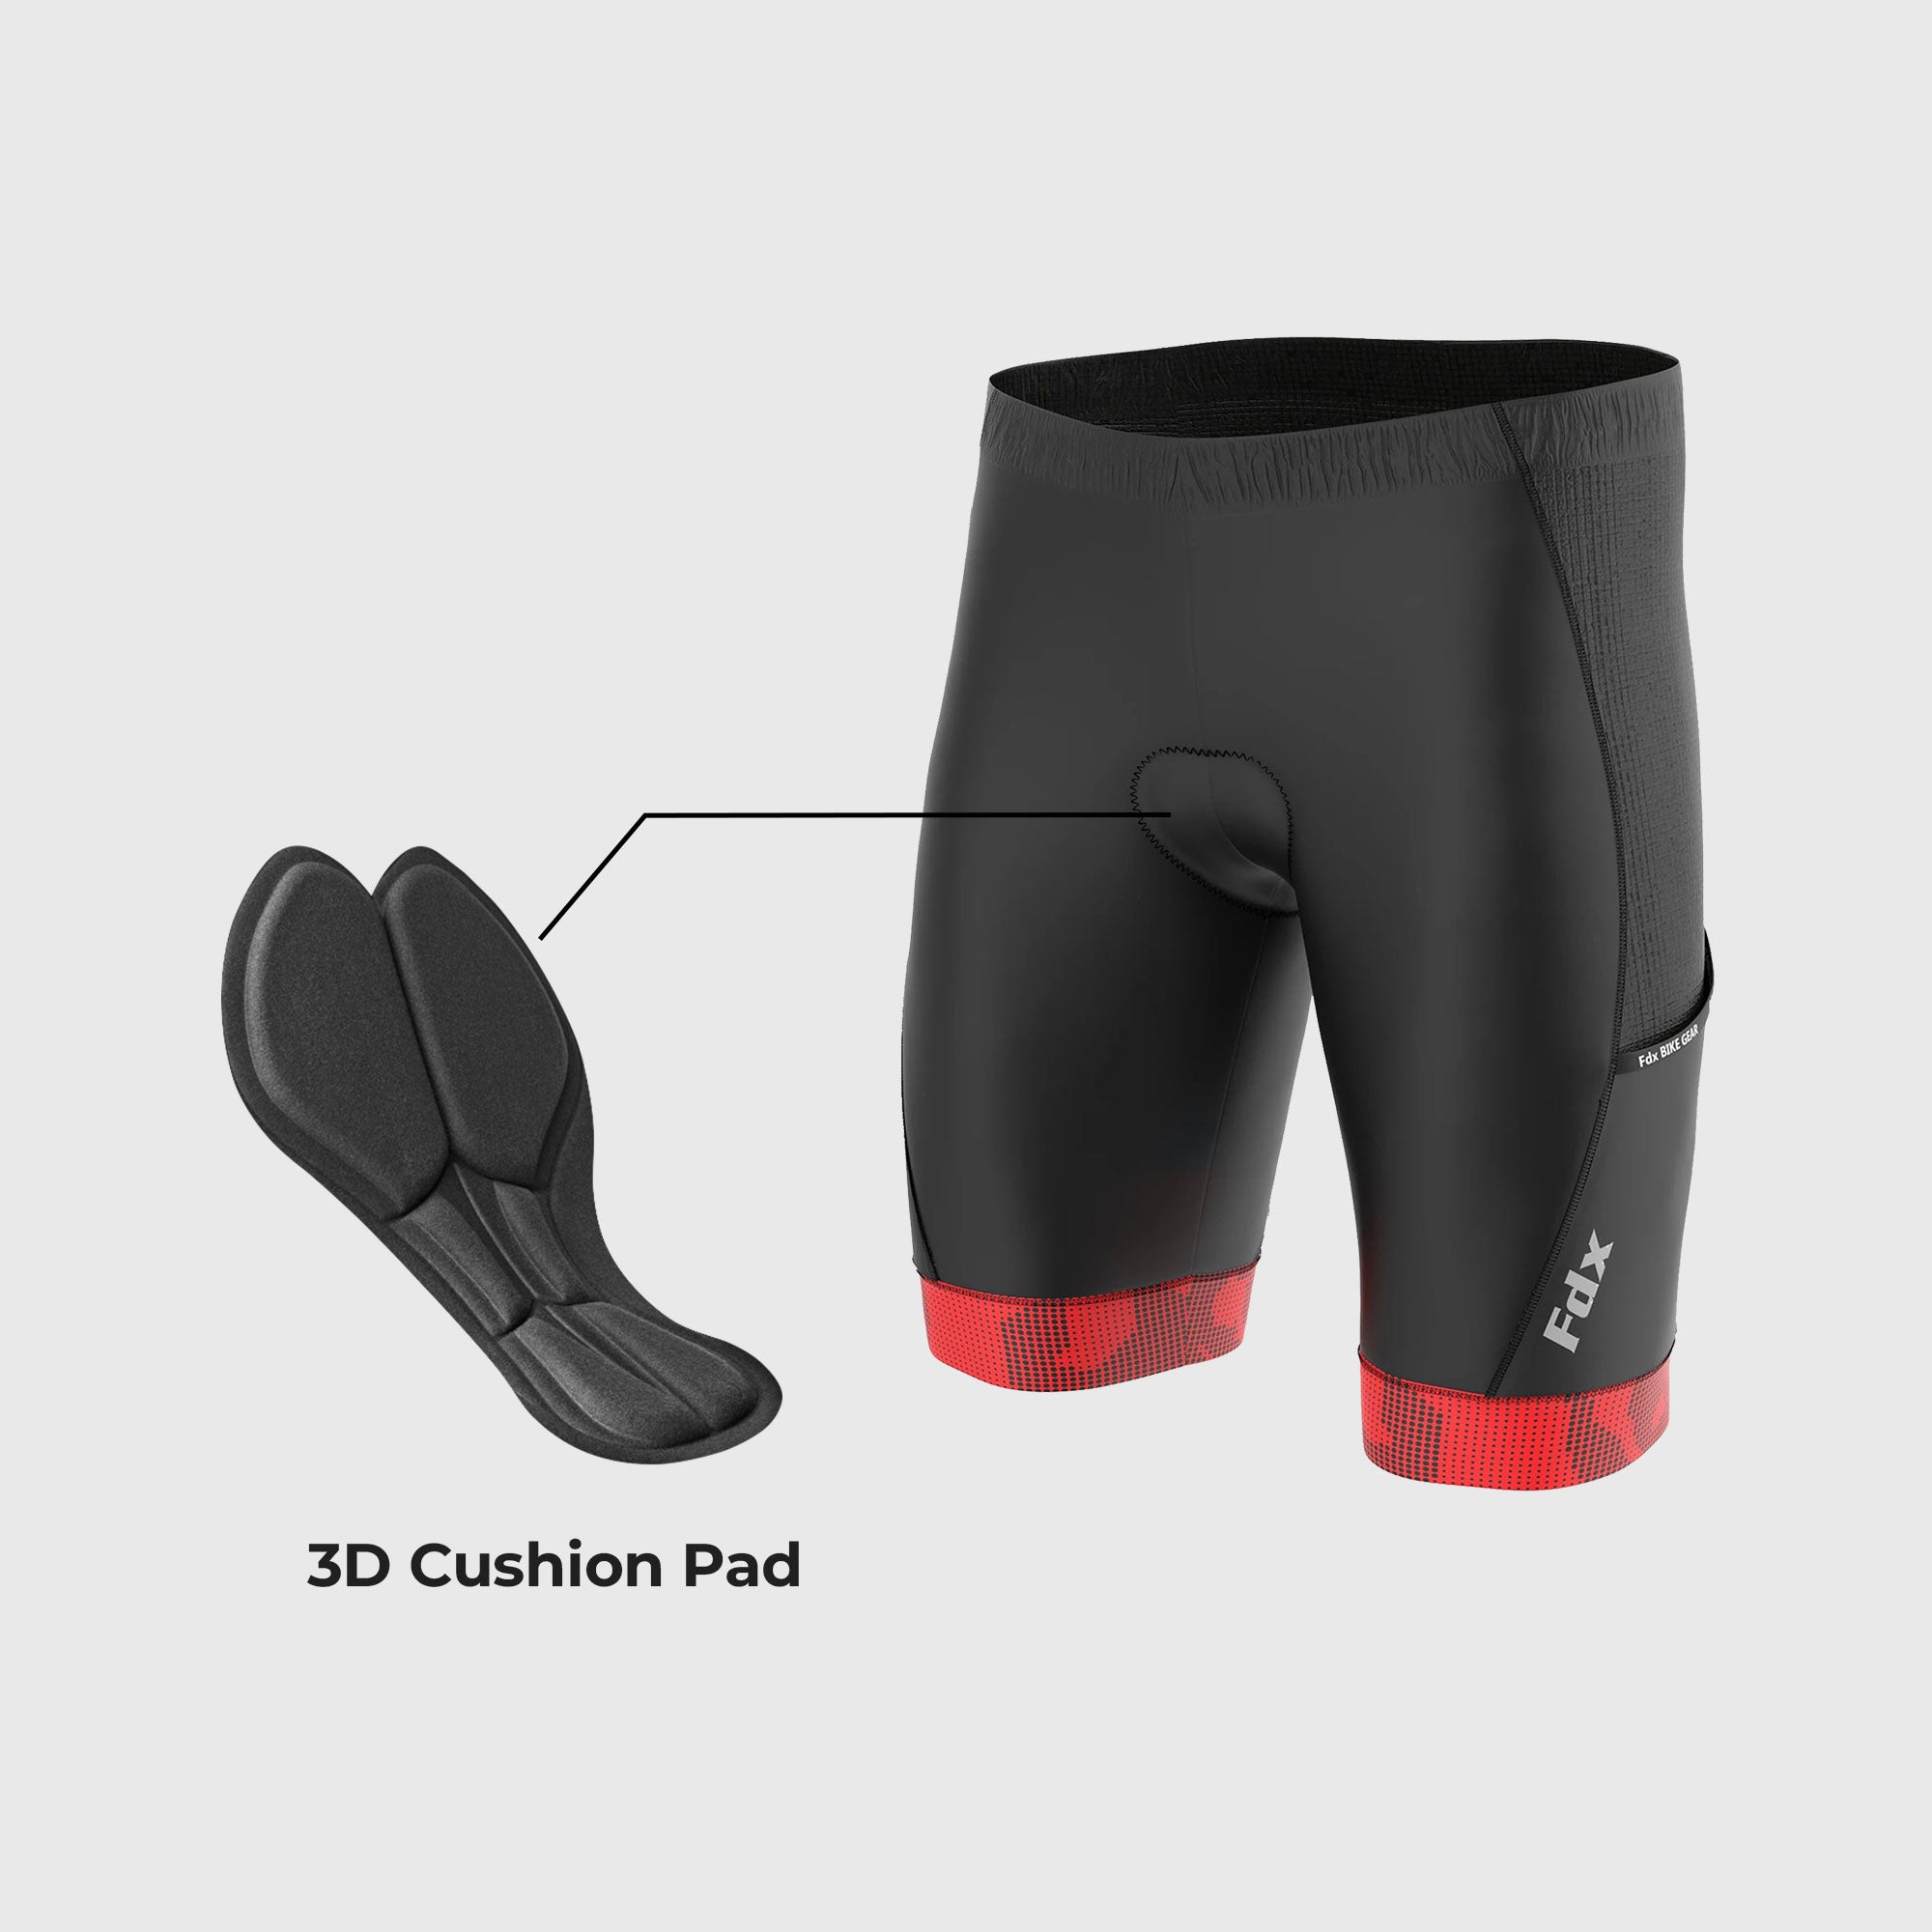 Fdx Mens Black & Red Gel Padded Cycling Shorts for Summer Best Outdoor Knickers Road Bike Short Length Pants - All Day